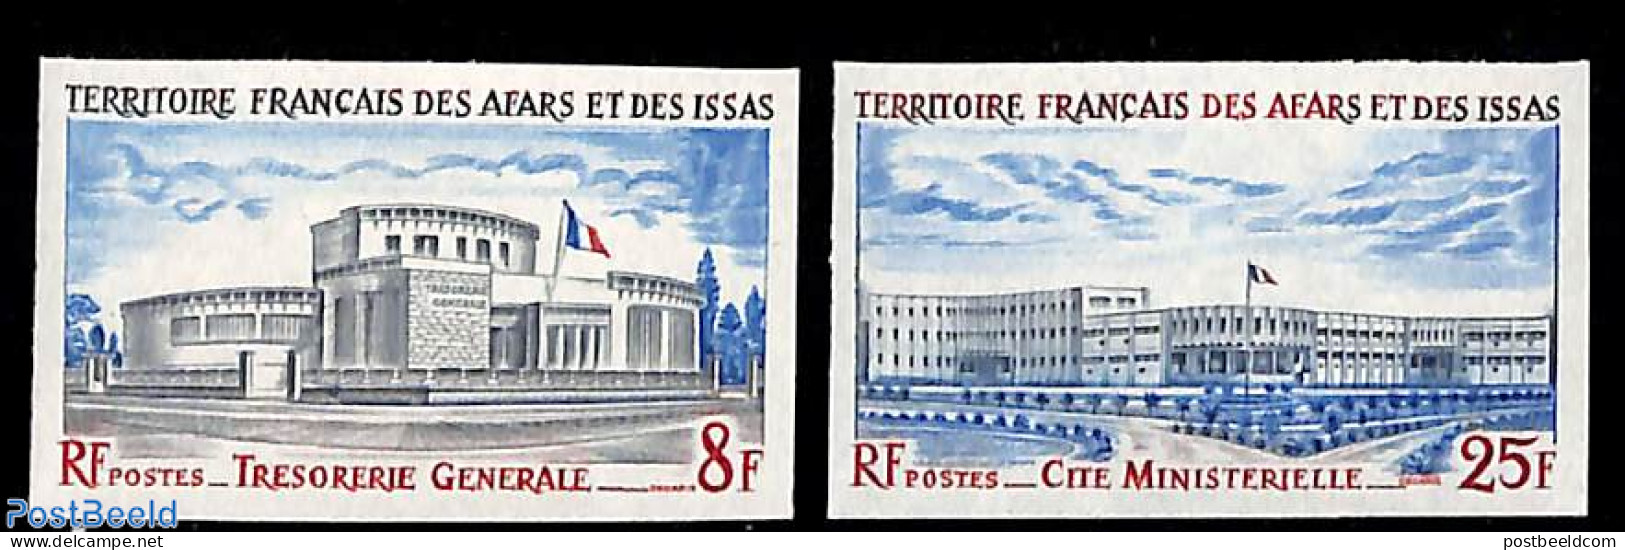 Afars And Issas 1975 Buildings 2v Imperforated, Mint NH, Art - Modern Architecture - Nuevos